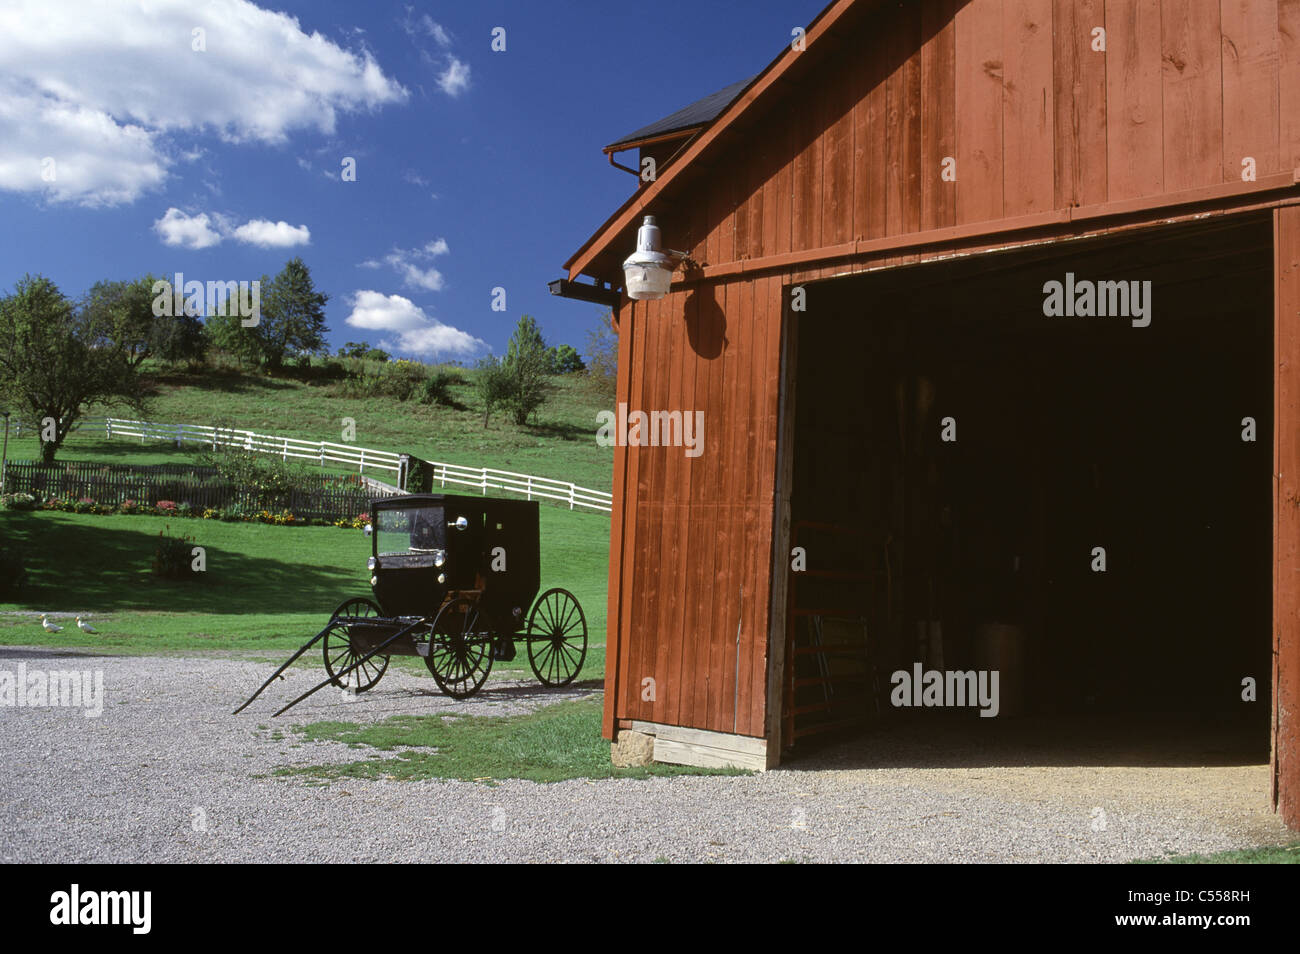 USA, Ohio, Holmes County, Millersburg, Wooden barn in Yoder's Amish Home Stock Photo